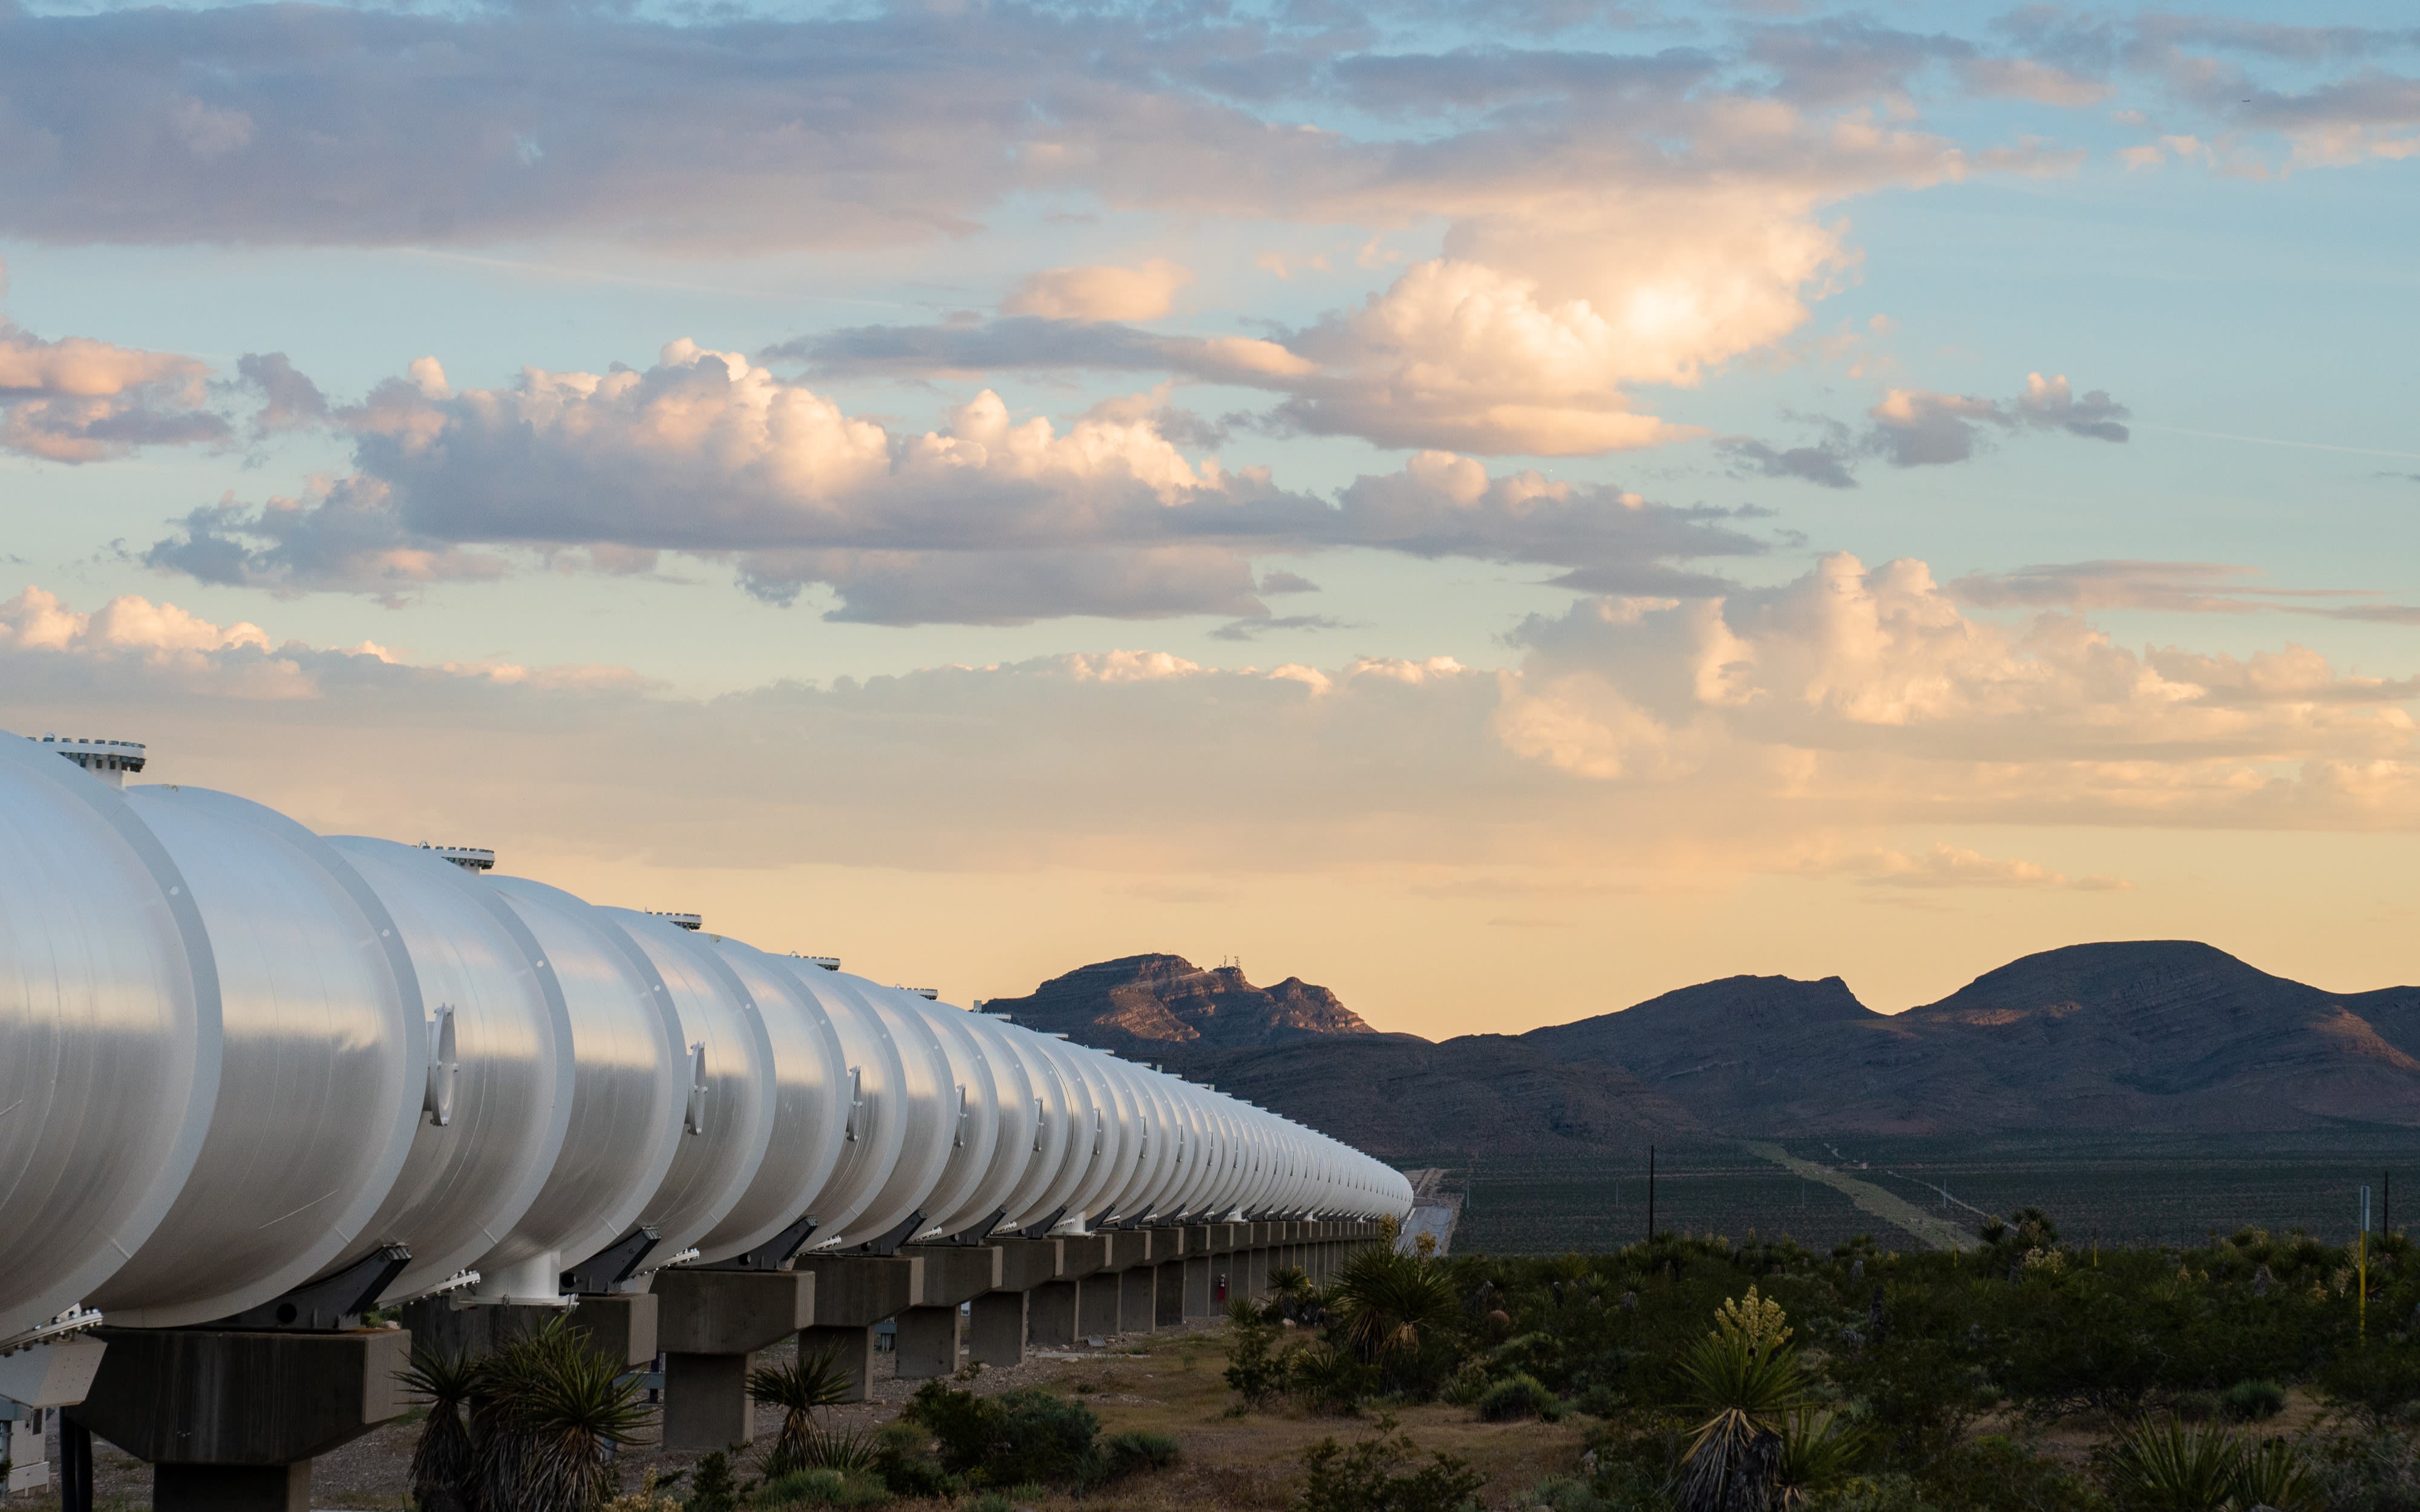 The Hyperloop across land with mountains in the background and sun setting